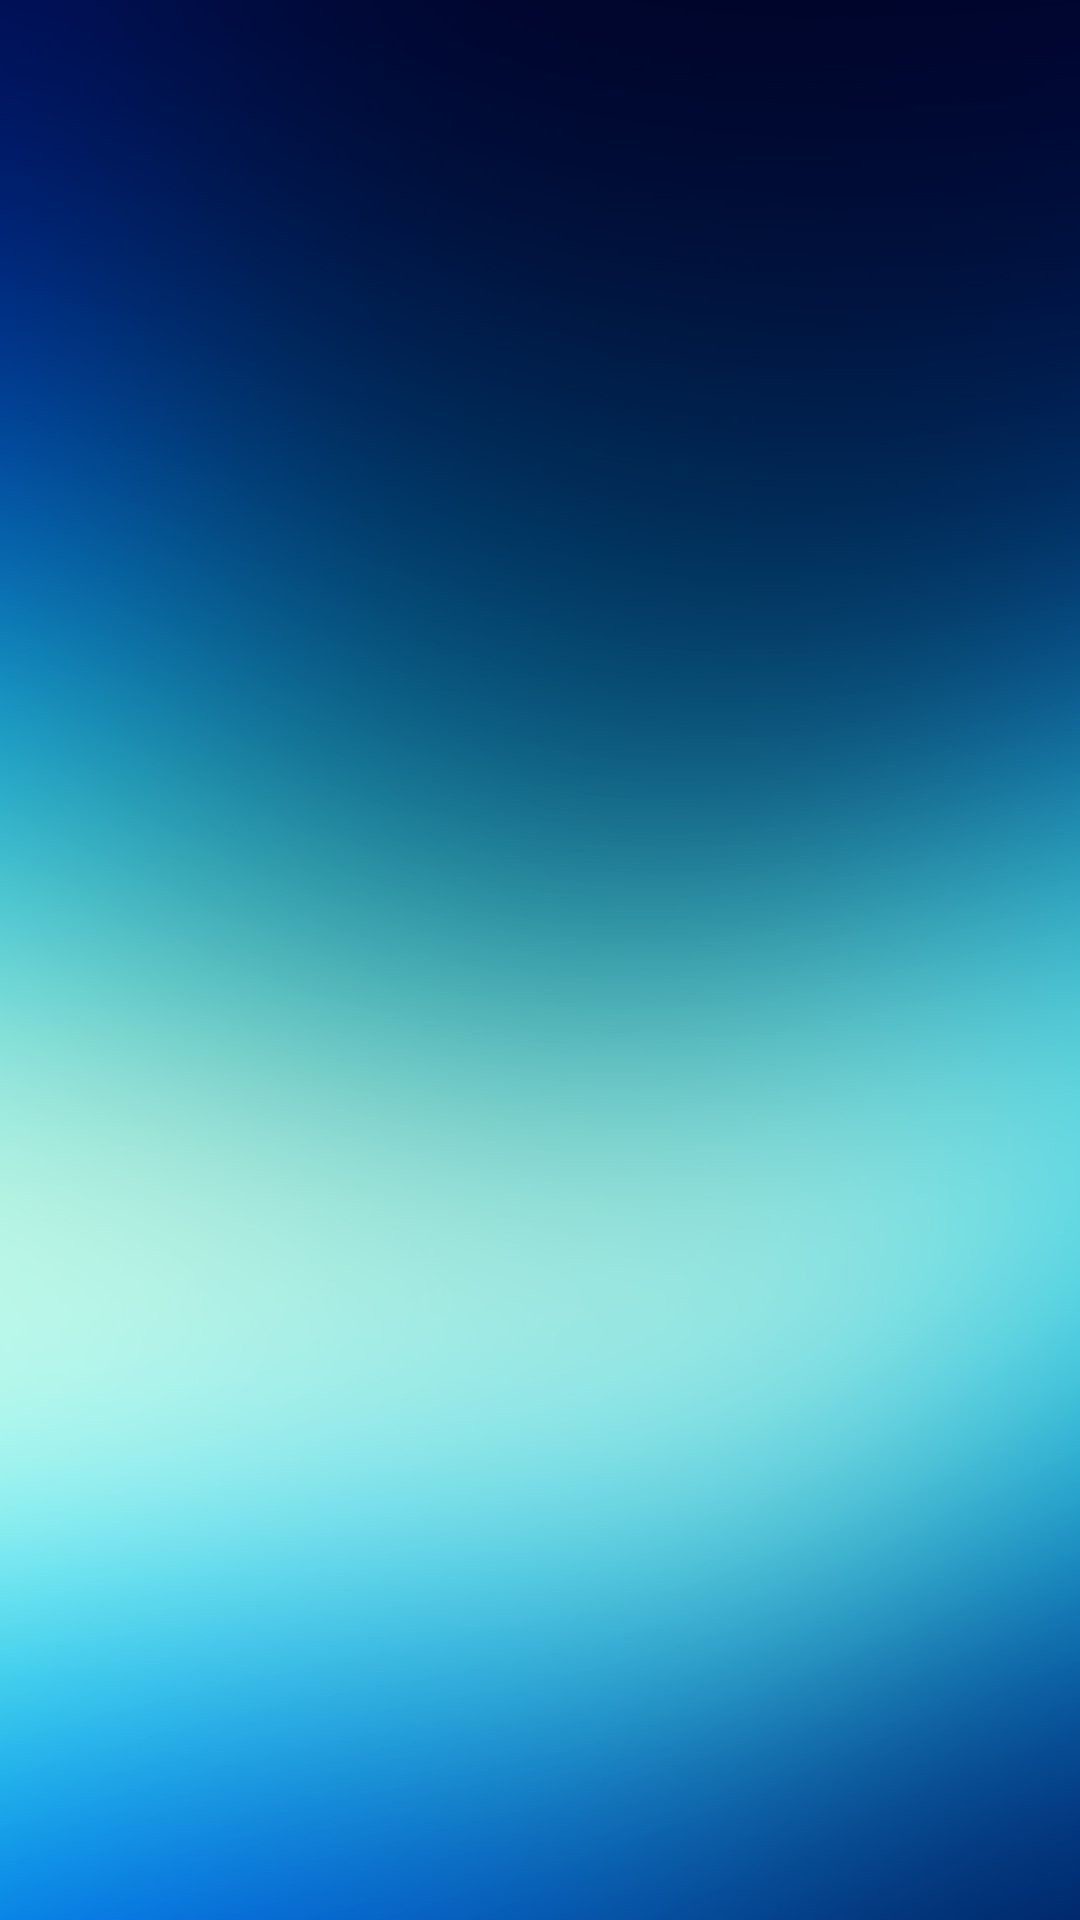 84 Blue Iphone Wallpapers on WallpaperPlay